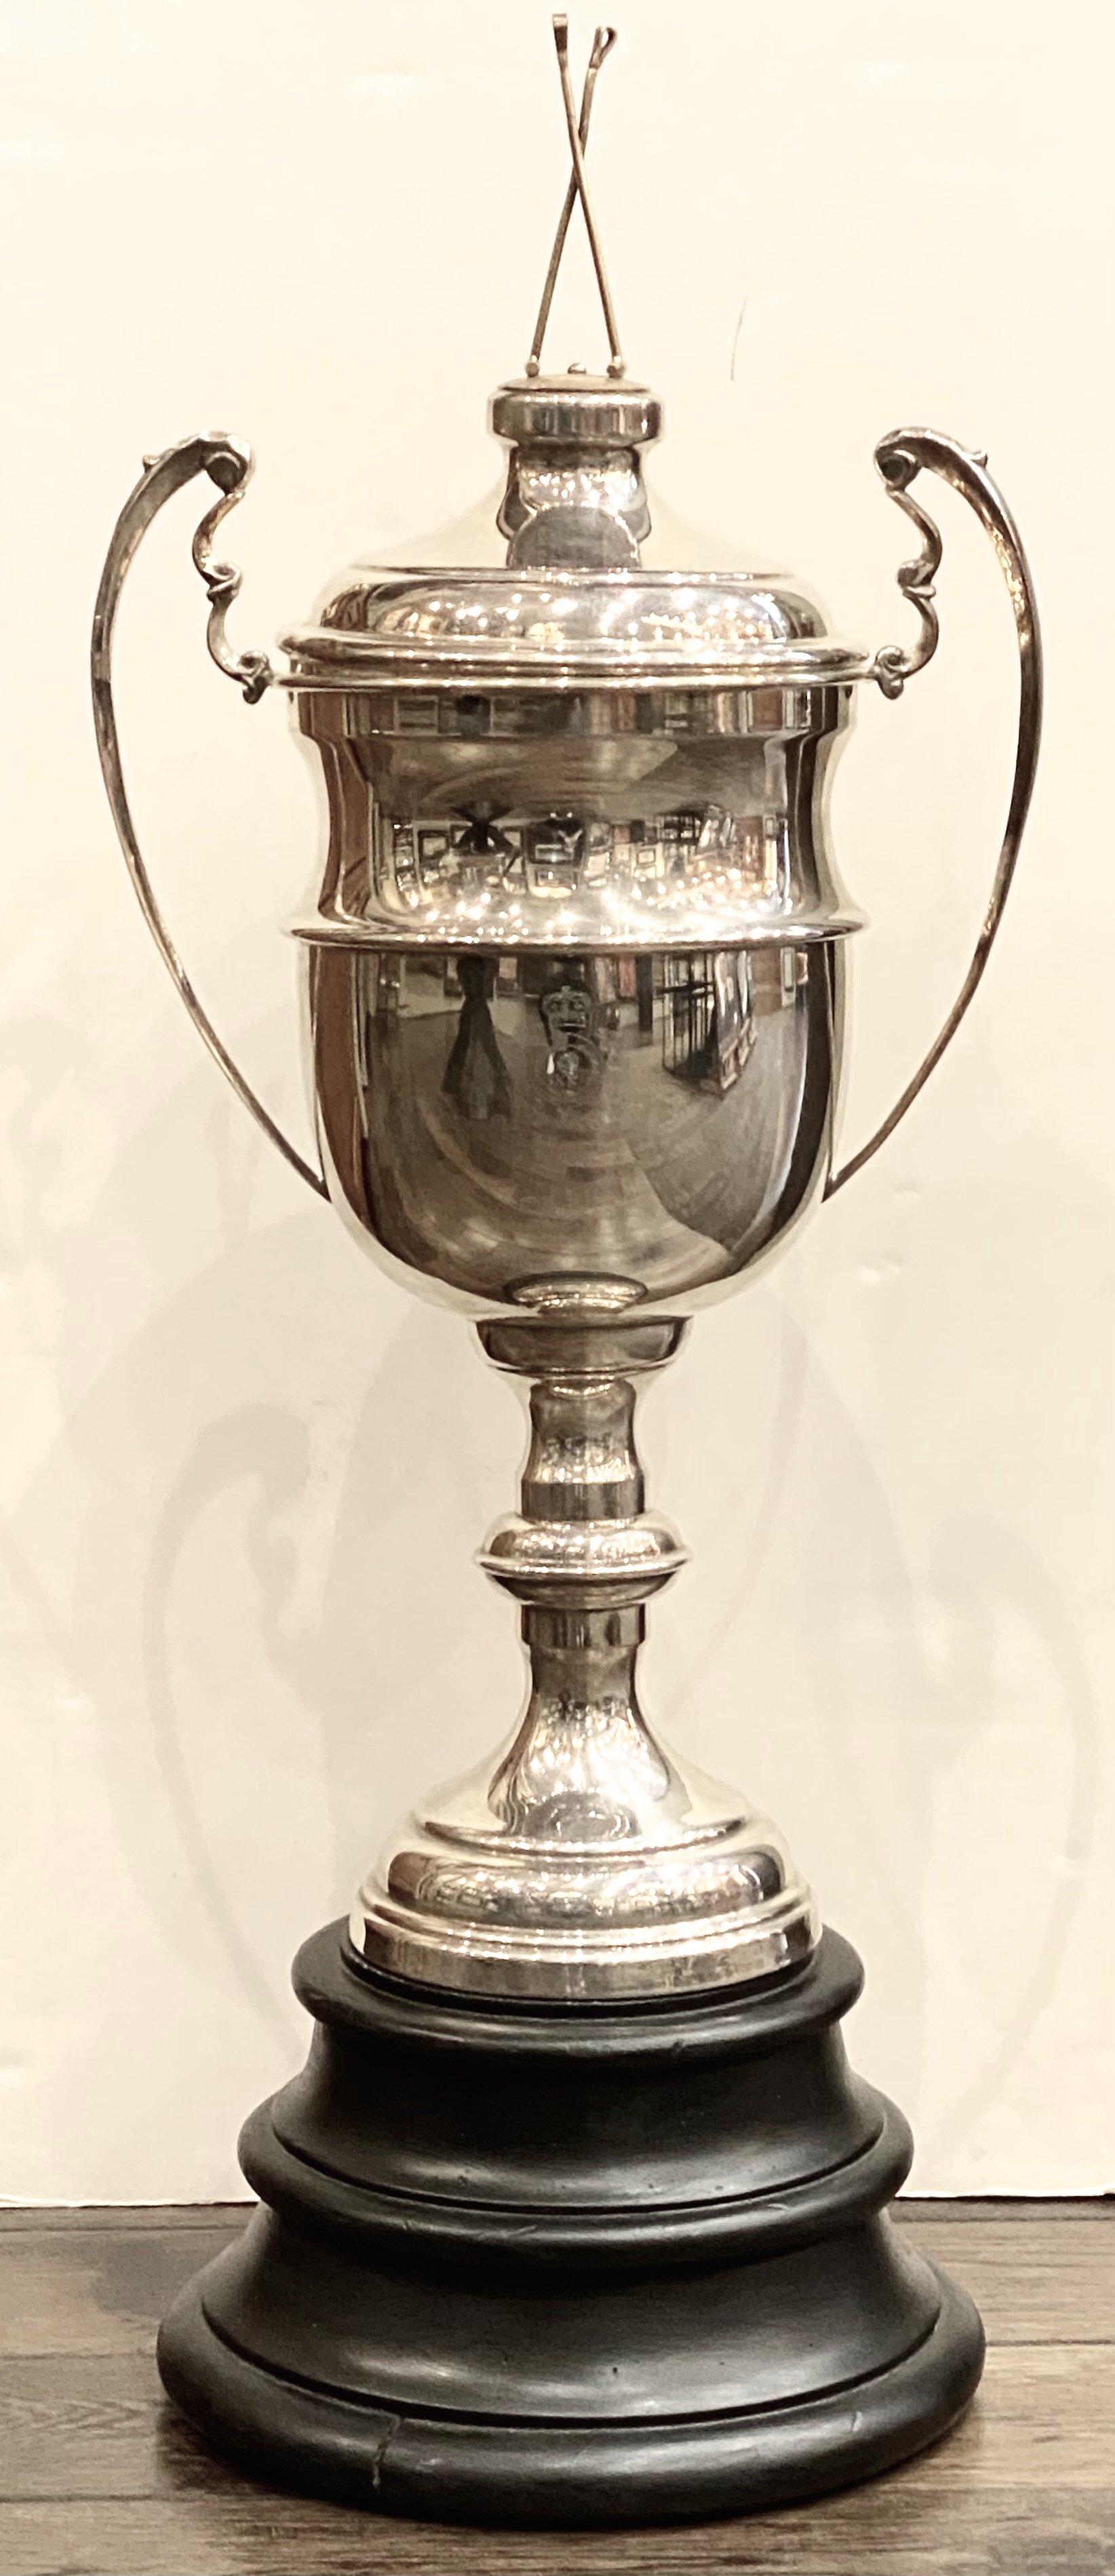 Offered is a vintage polo trophy, dating to 1910. This large and decorative trophy is plated in silver and stands on a wooden base, which is removable. It is completed with a large lid with two interlocked polo sticks. The trophy also has large,